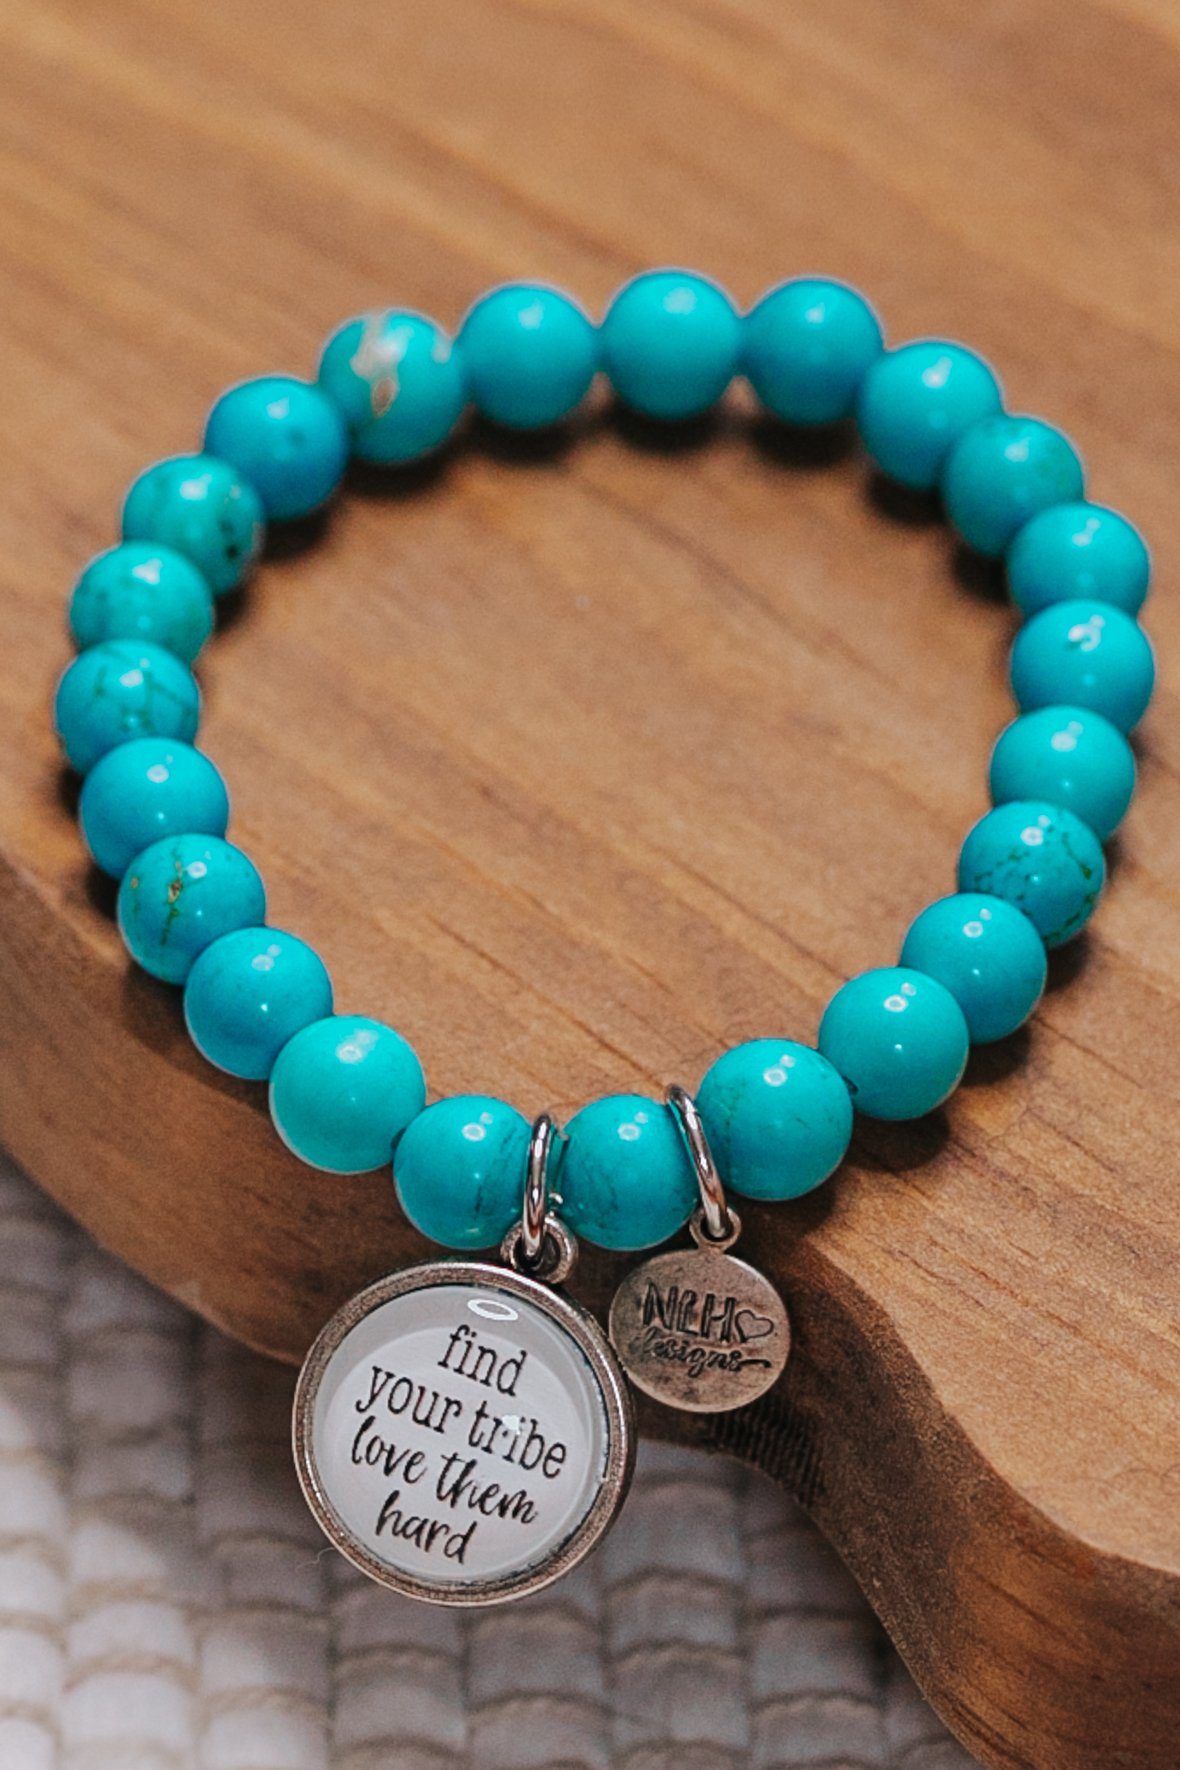 Find Your Tribe Love Them Hard Stretch Bracelet - Filly Flair